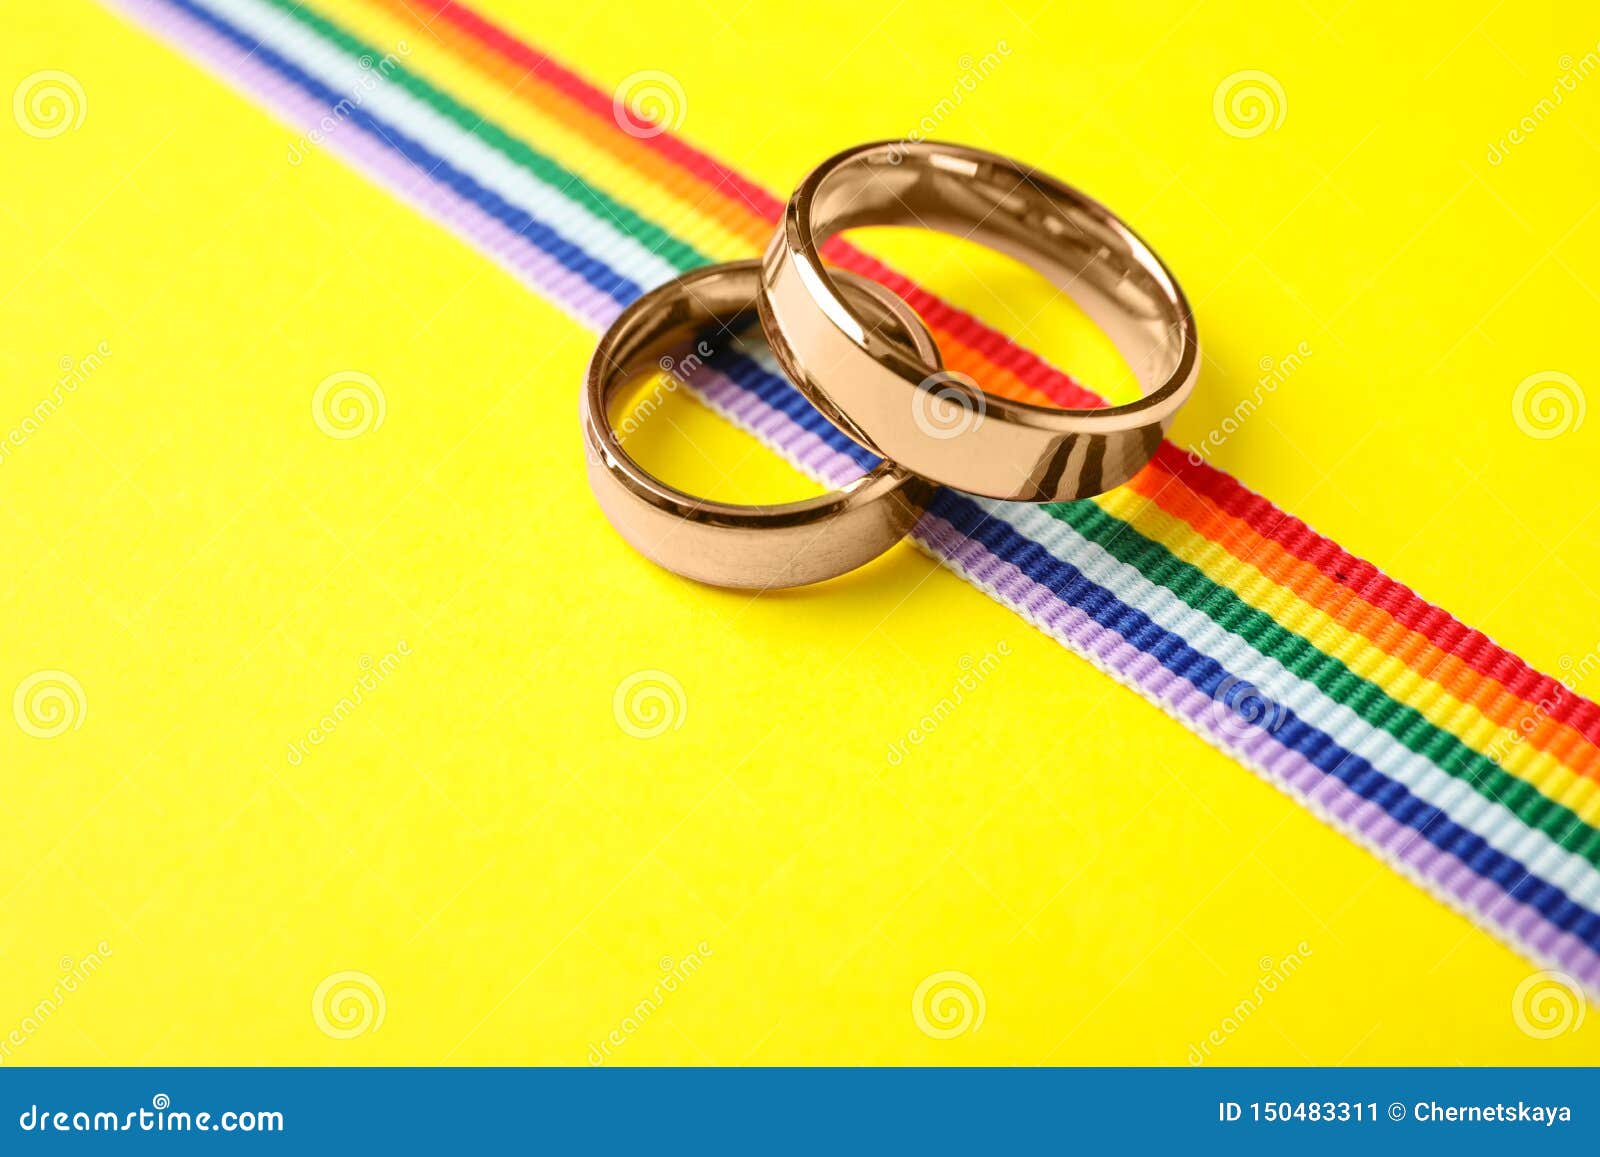 Wedding Rings and Rainbow Ribbon on Color Background Stock Image ...